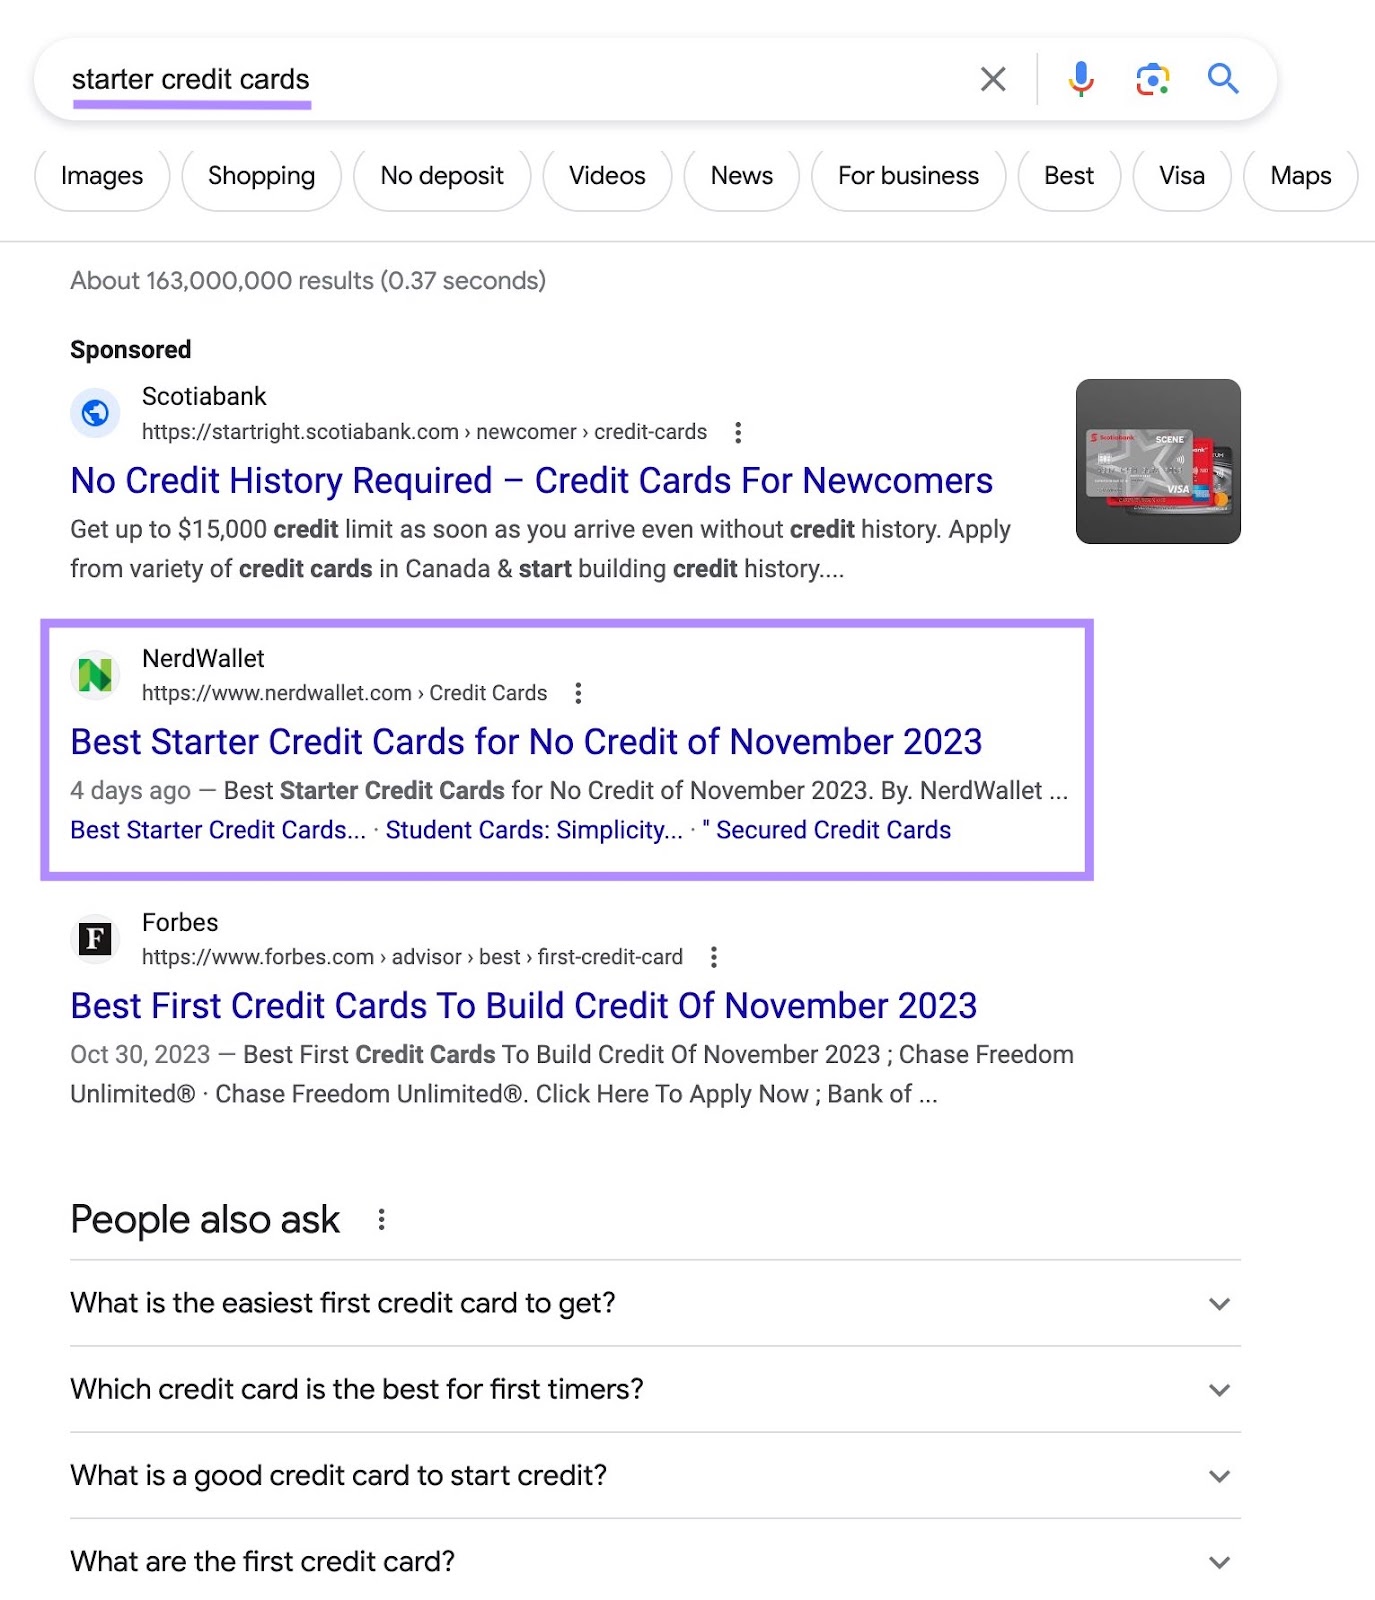 NerdWallet highlighted on Google SERP for "starter credit cards" query